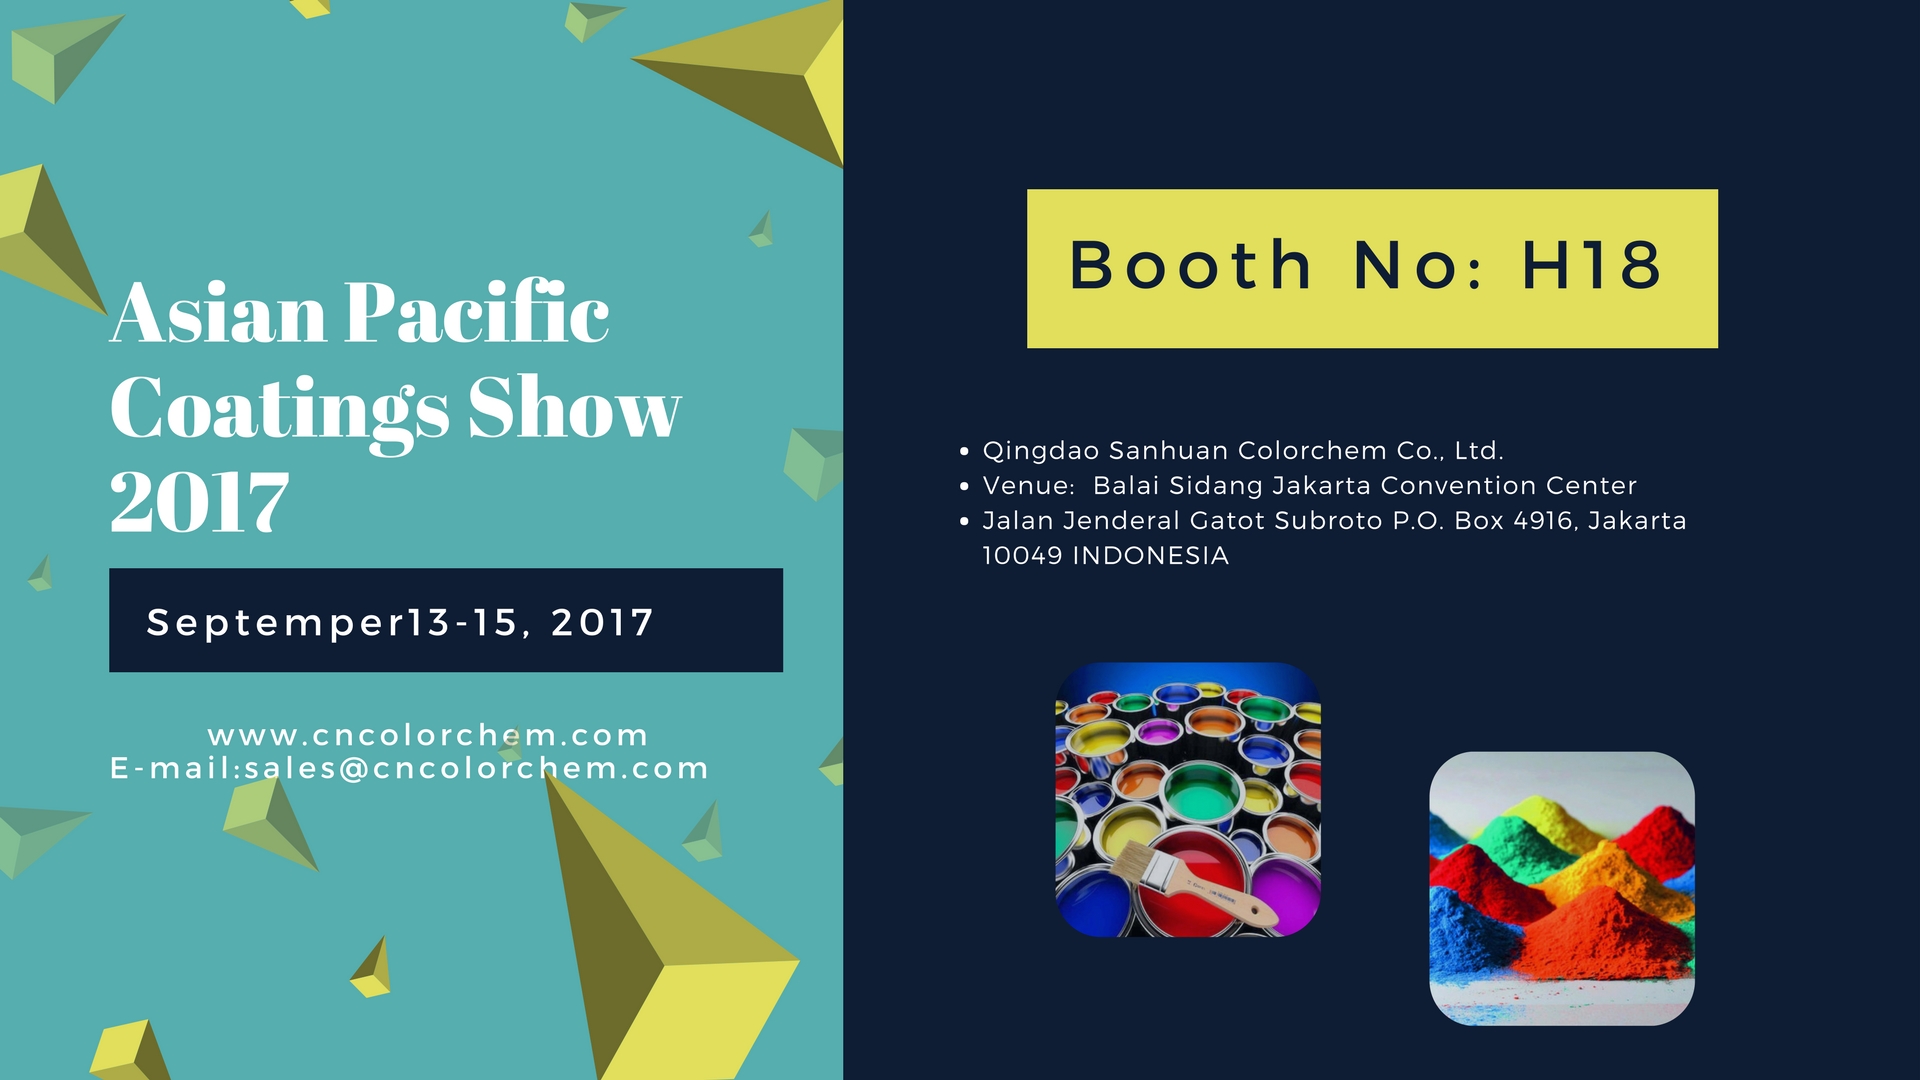 The Asia Pacific Coatings Show 2017